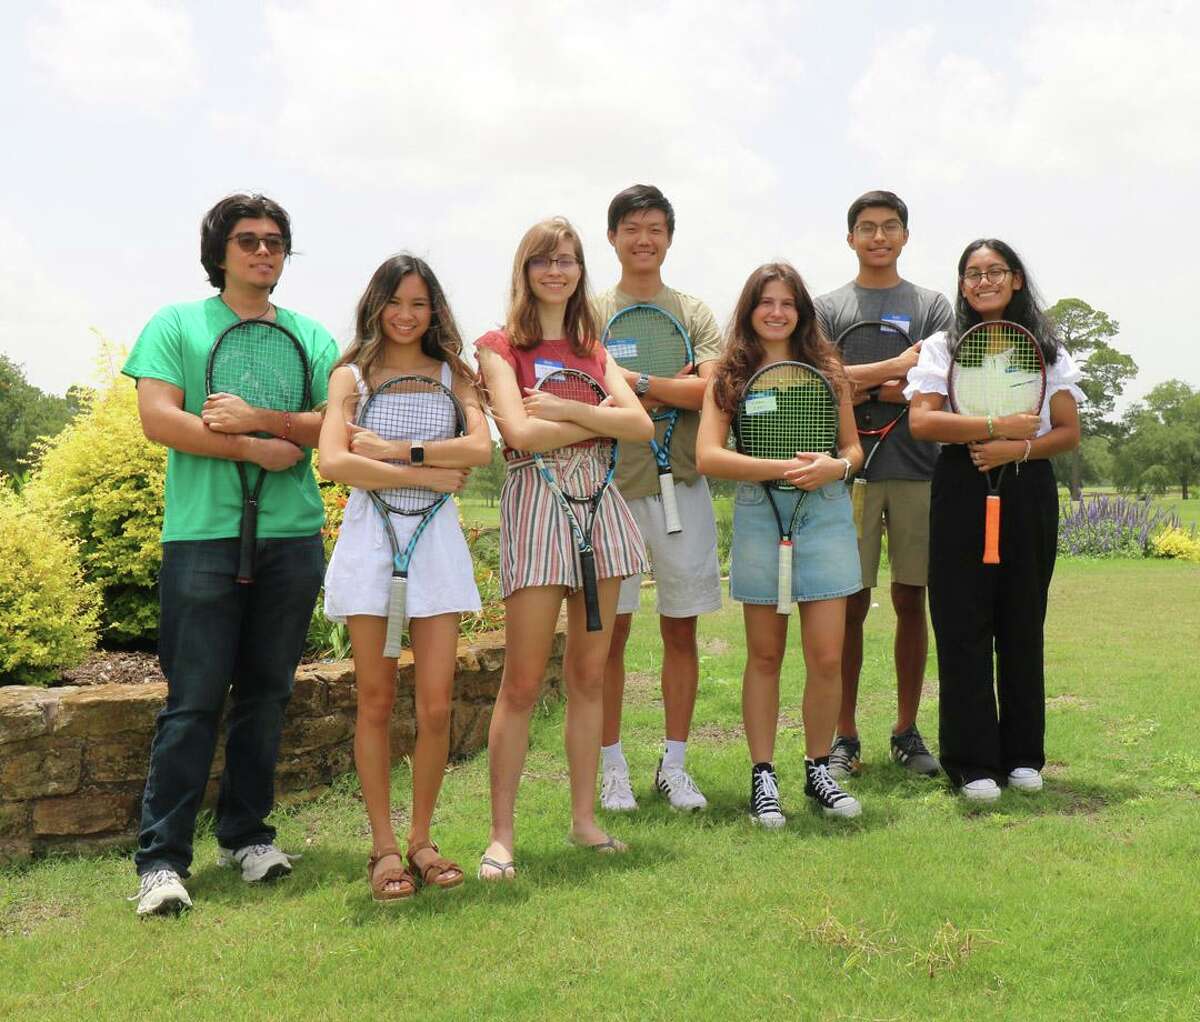 Students attending HTA's scholarship luncheon at Beck's Prime in Memorial Park were, from left, Isaac Harris, Alison Chen, Ashley Wolf, Jonathan Lin, Andrea Erkal, Aiden Garcia and Briana Valentin.